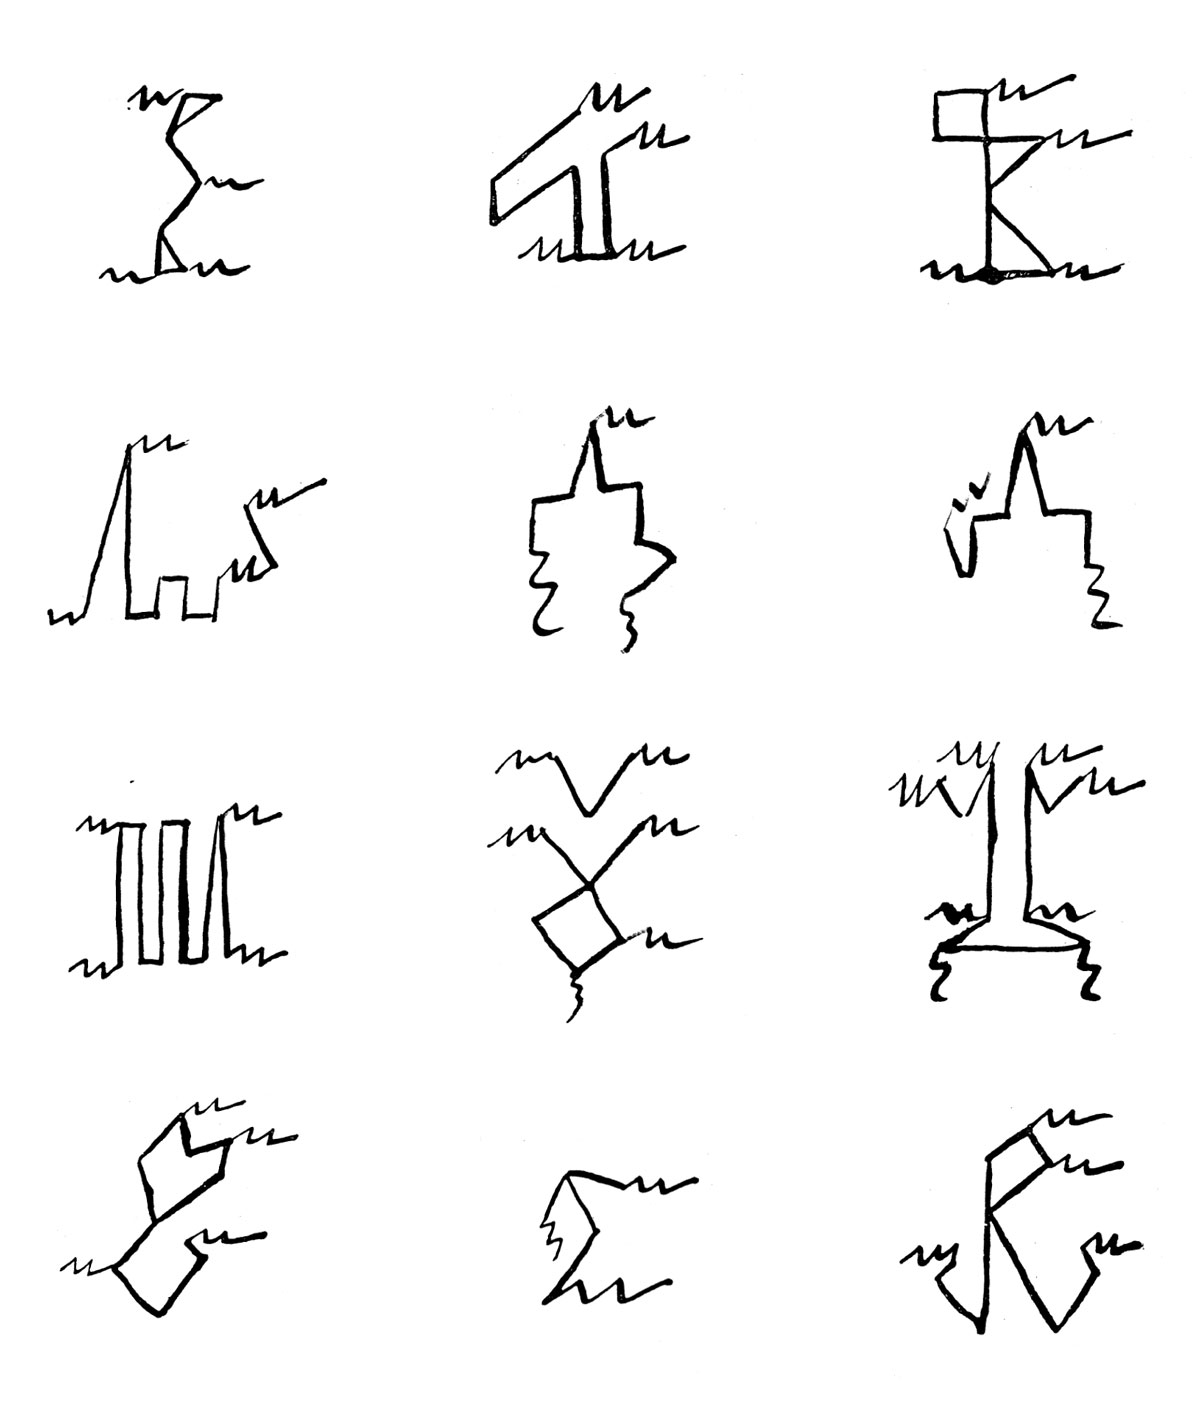 Samples of Martian writing produced by Hélène Smith during one of her séances. From top, left to right: Traveler, Dog Breeder, Hole Digger; Runner, Virgin Girl, Bearer of Sacred Water; Guide, Lodger, Guardian; Town Crier, Dowser, Fiancée.